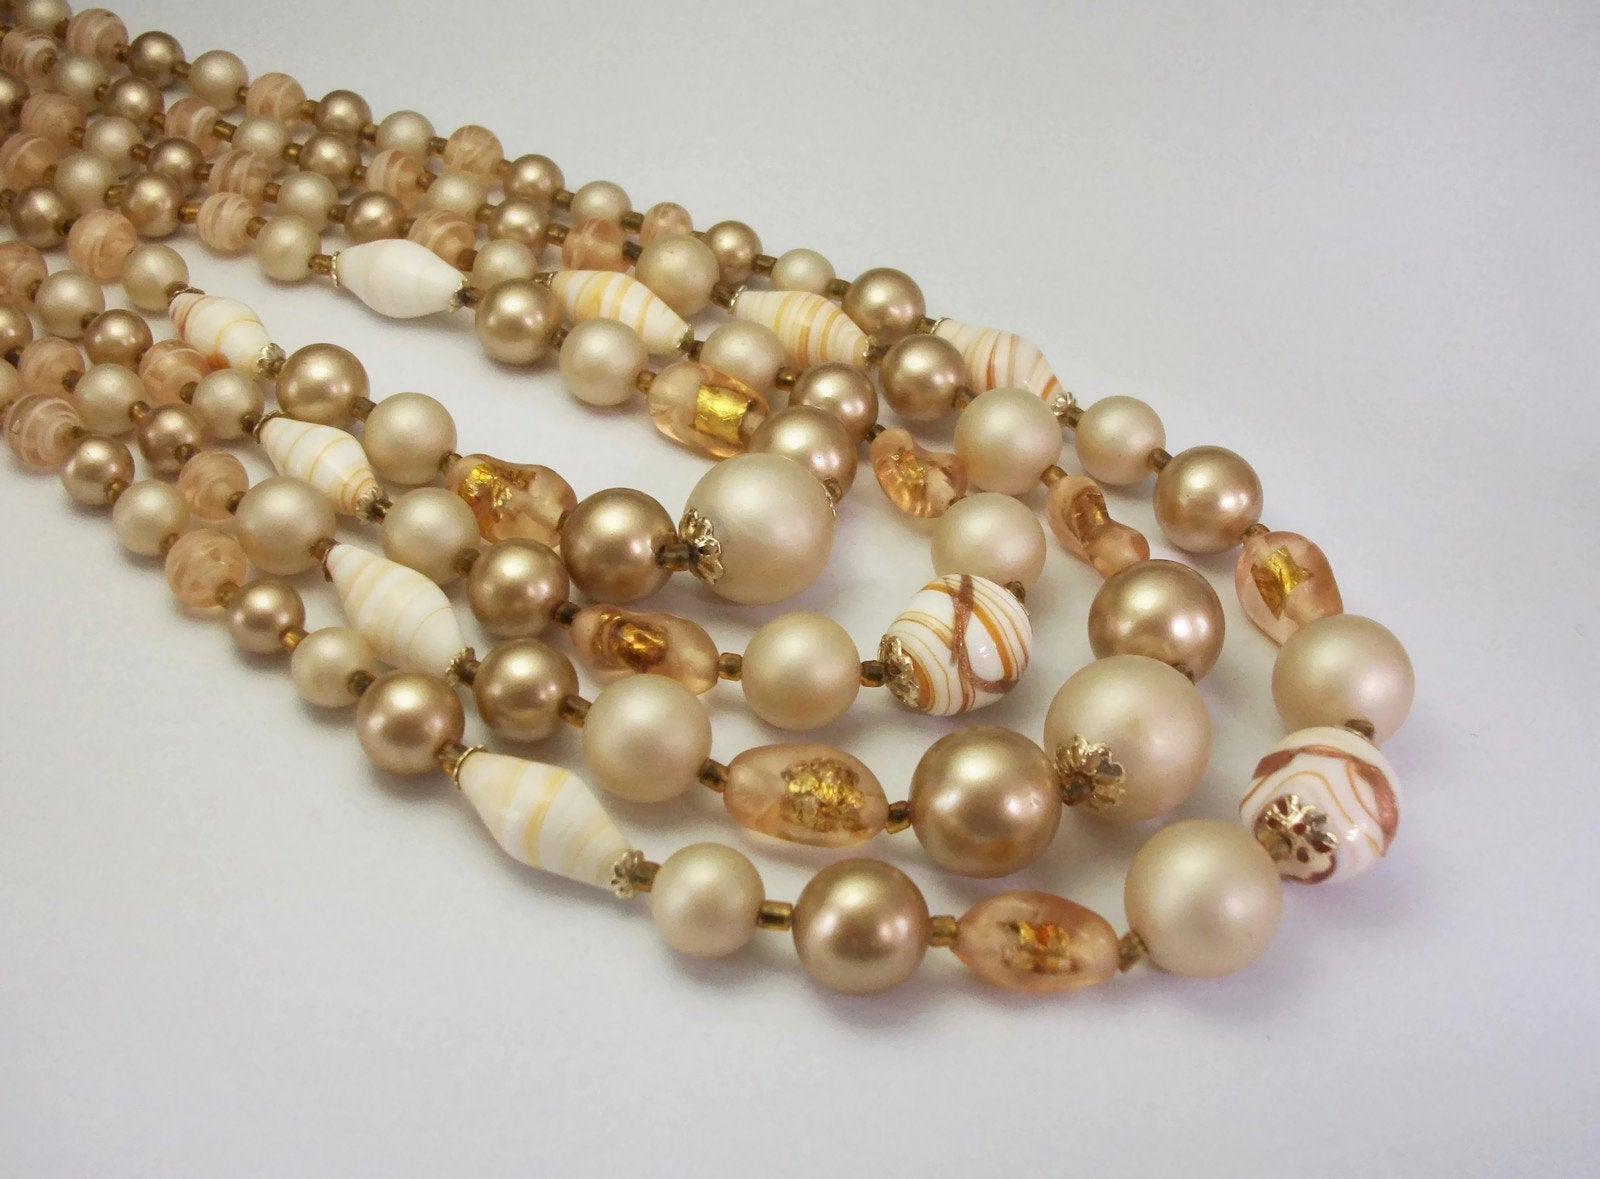 Delicate WWII Era Gold Painted Bead Necklace, 17, 1940's Faux Pearl Necklace,  2-6mm Plastic Beads, Vintage Jewelry, Gold Beaded Necklace - Etsy